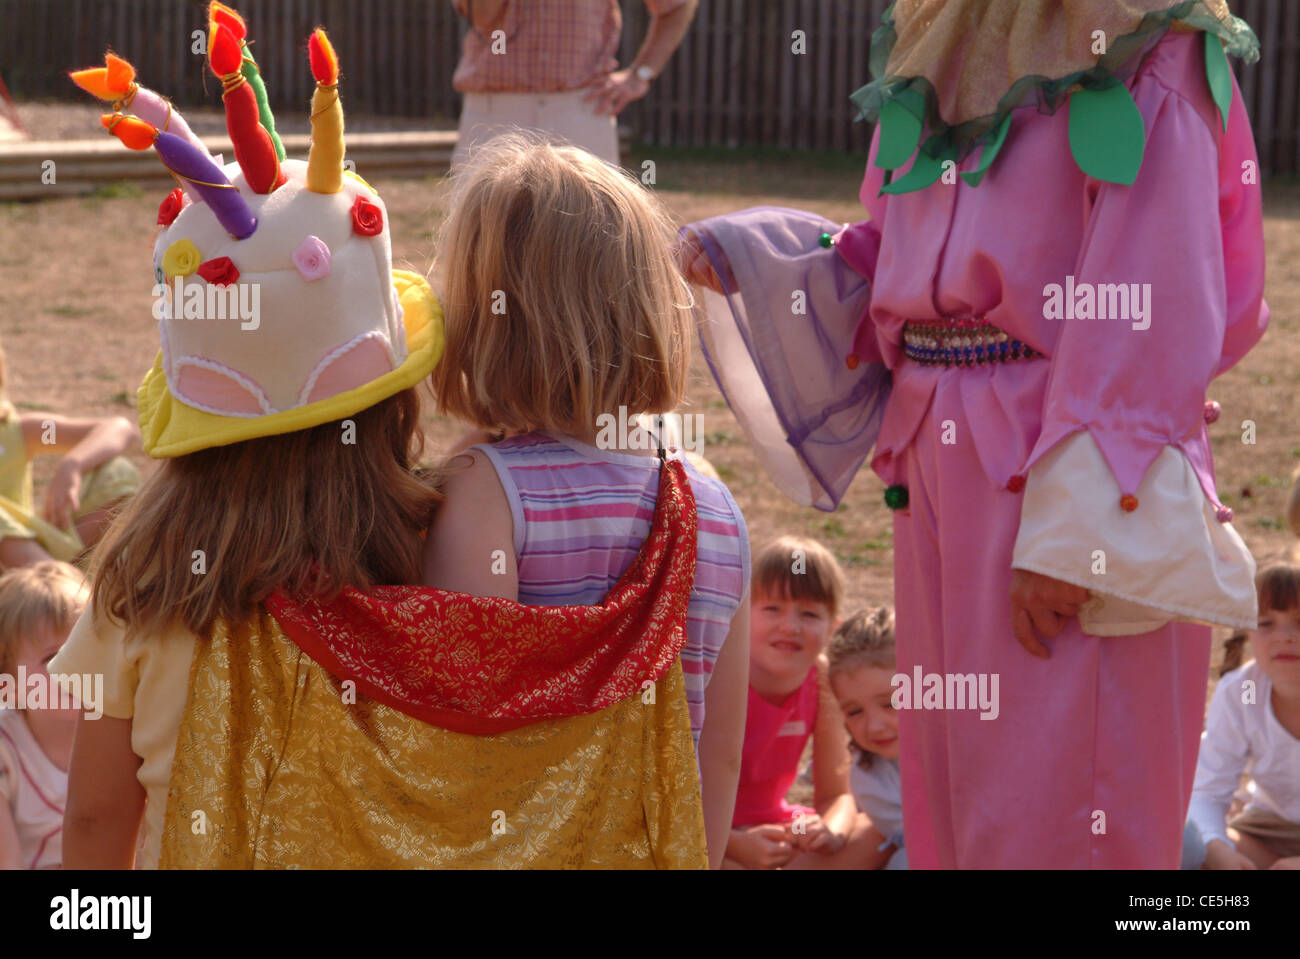 Children S Birthday Party Entertainer High Resolution Stock Photography And Images Alamy